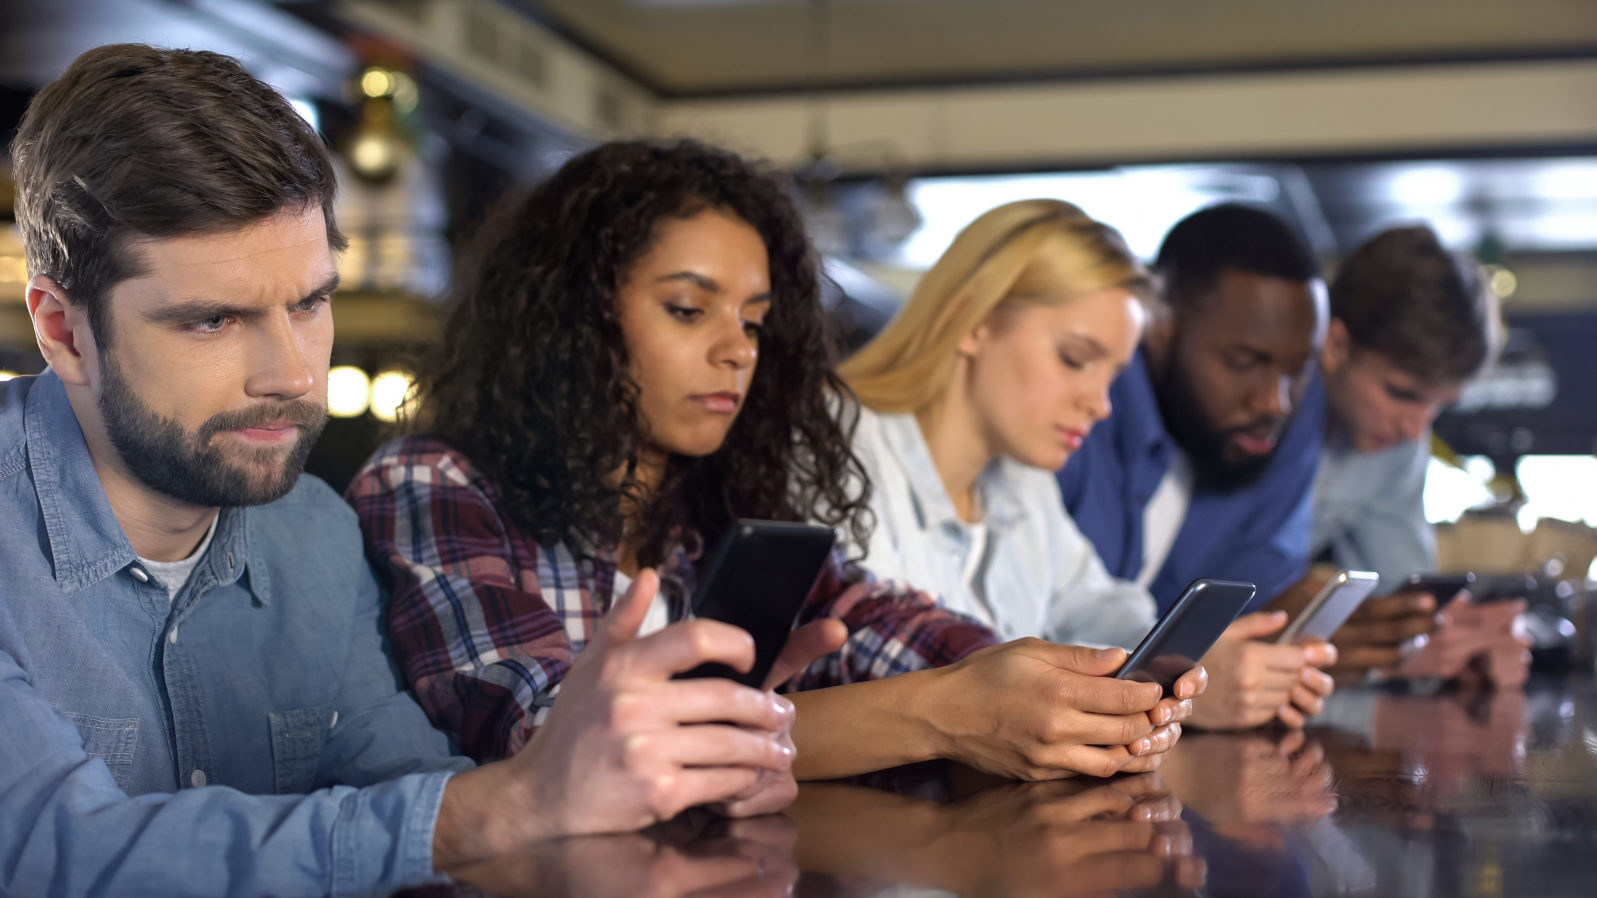 Multi-racial friends scrolling smartphones ignoring each other, gadget addiction